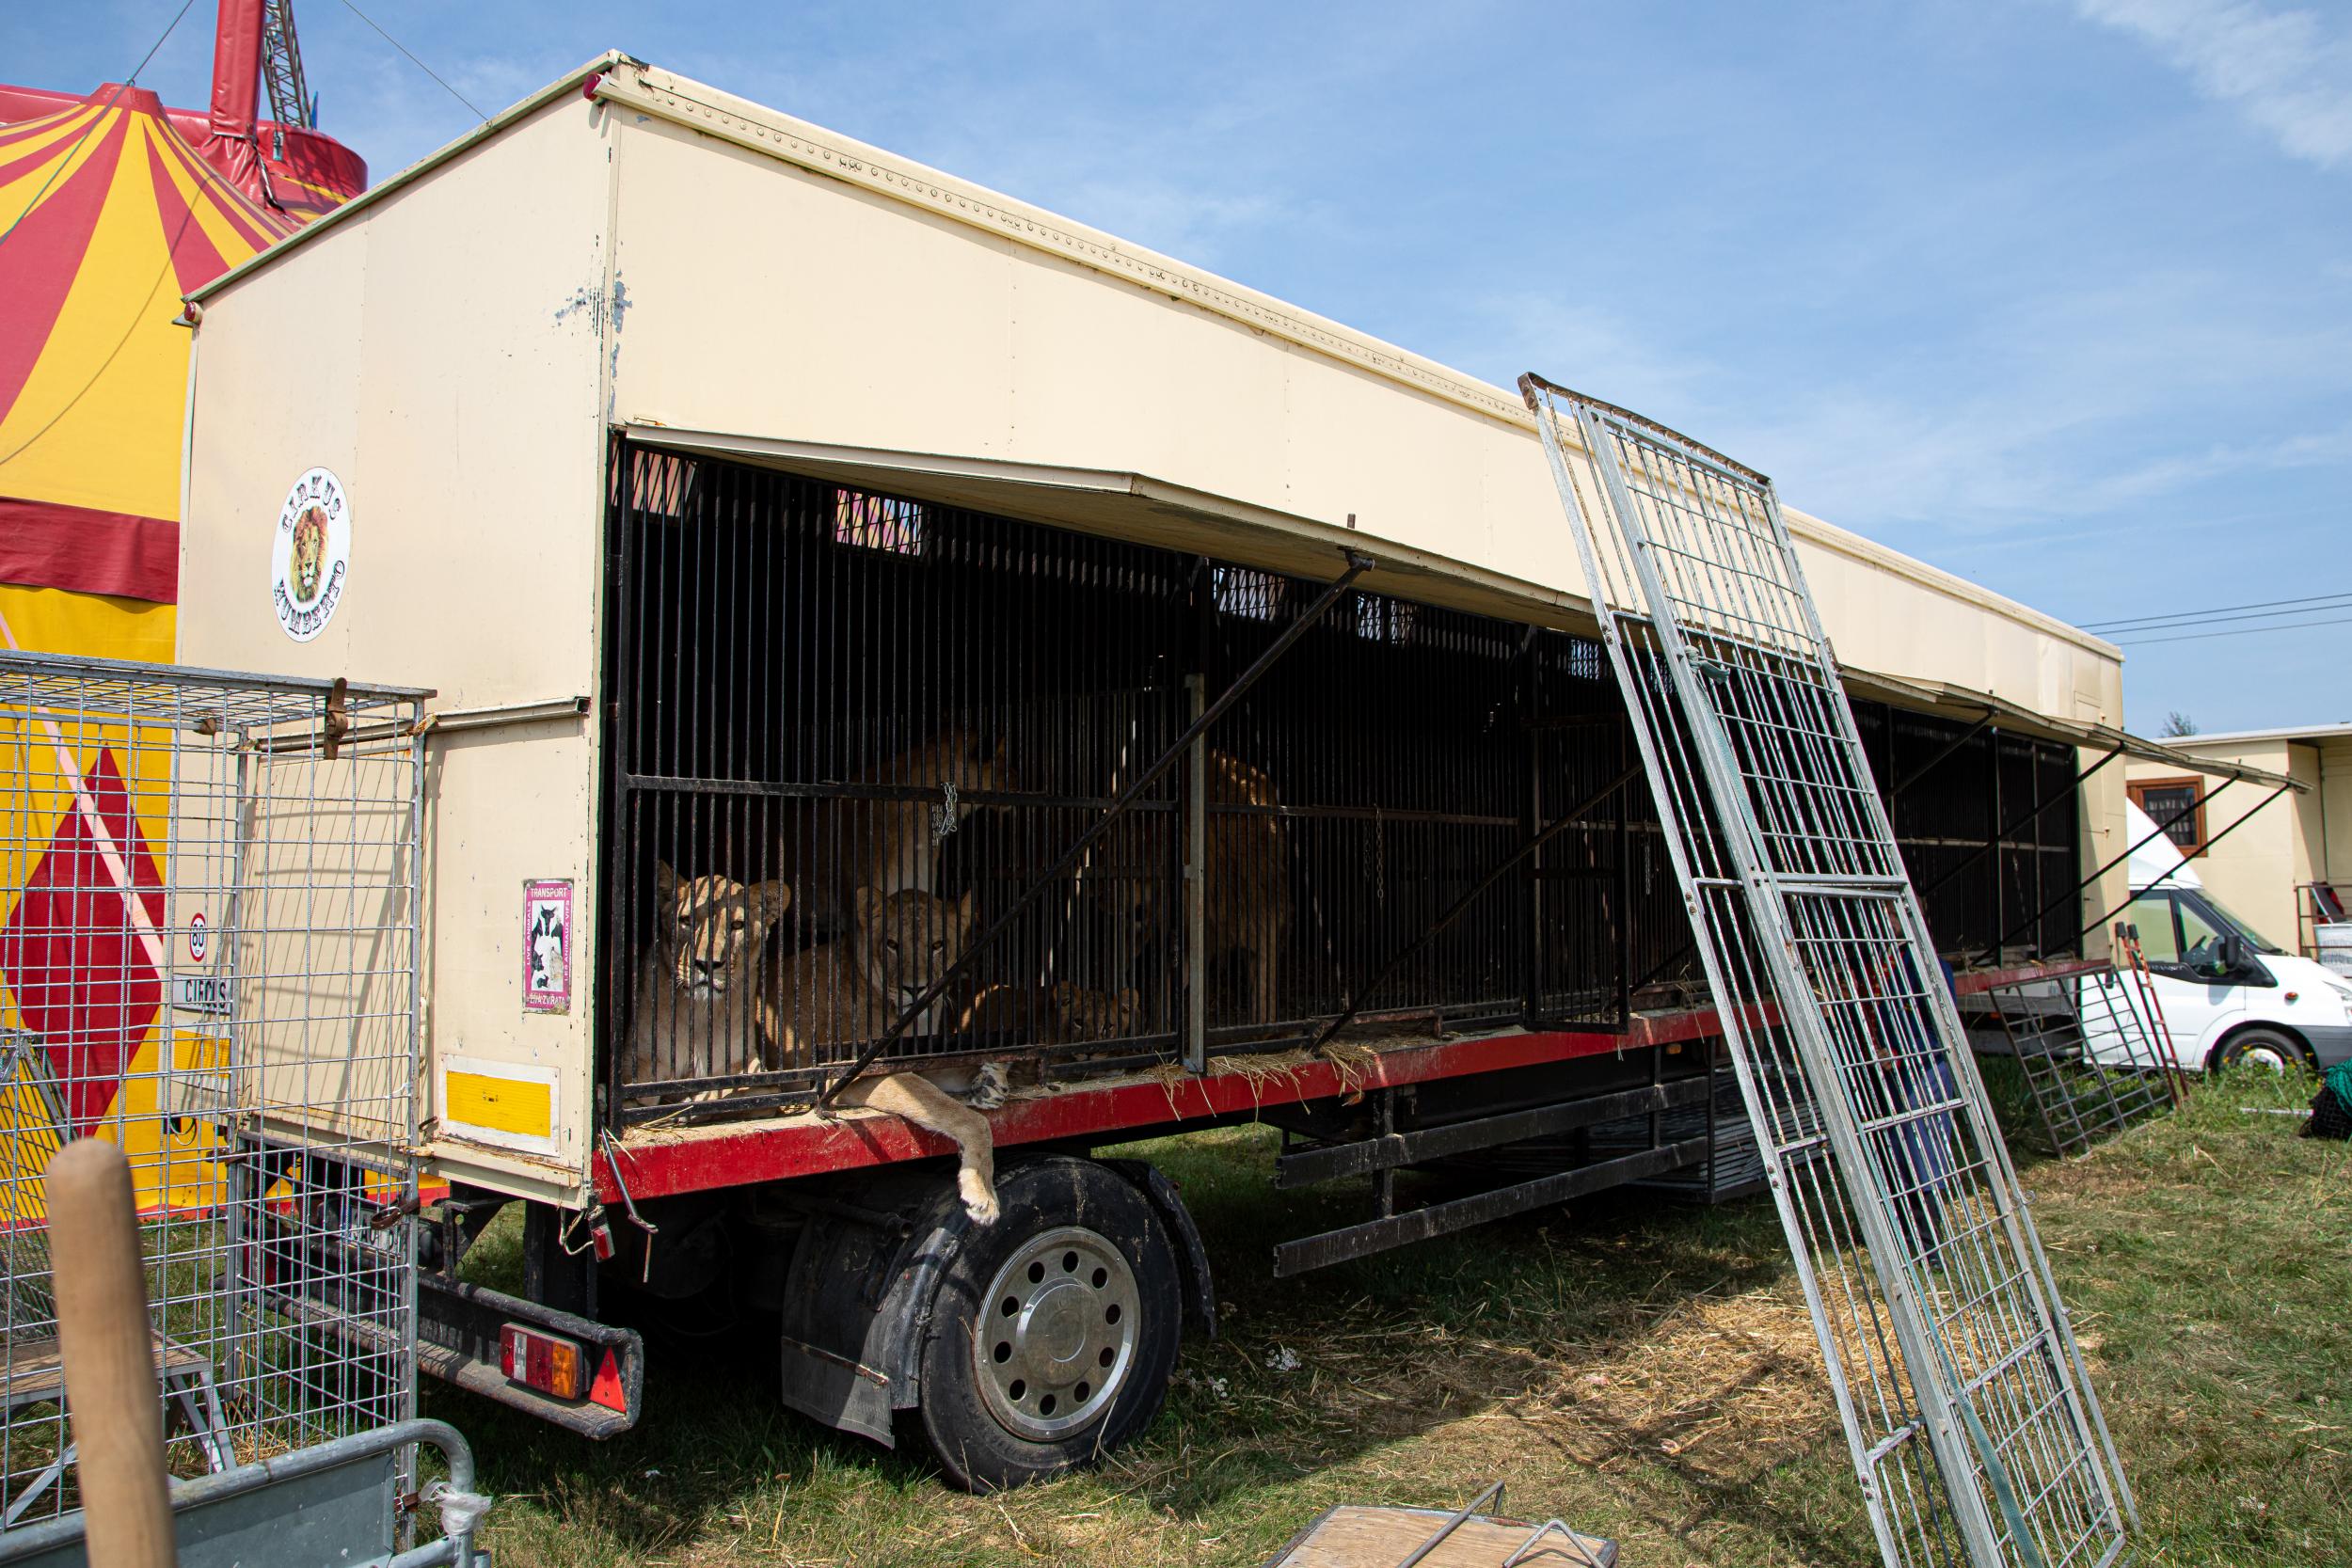 Lions kept in a small trailer away from circus performances in the Czech Republic (Four Paws/Aaron Gekoski)